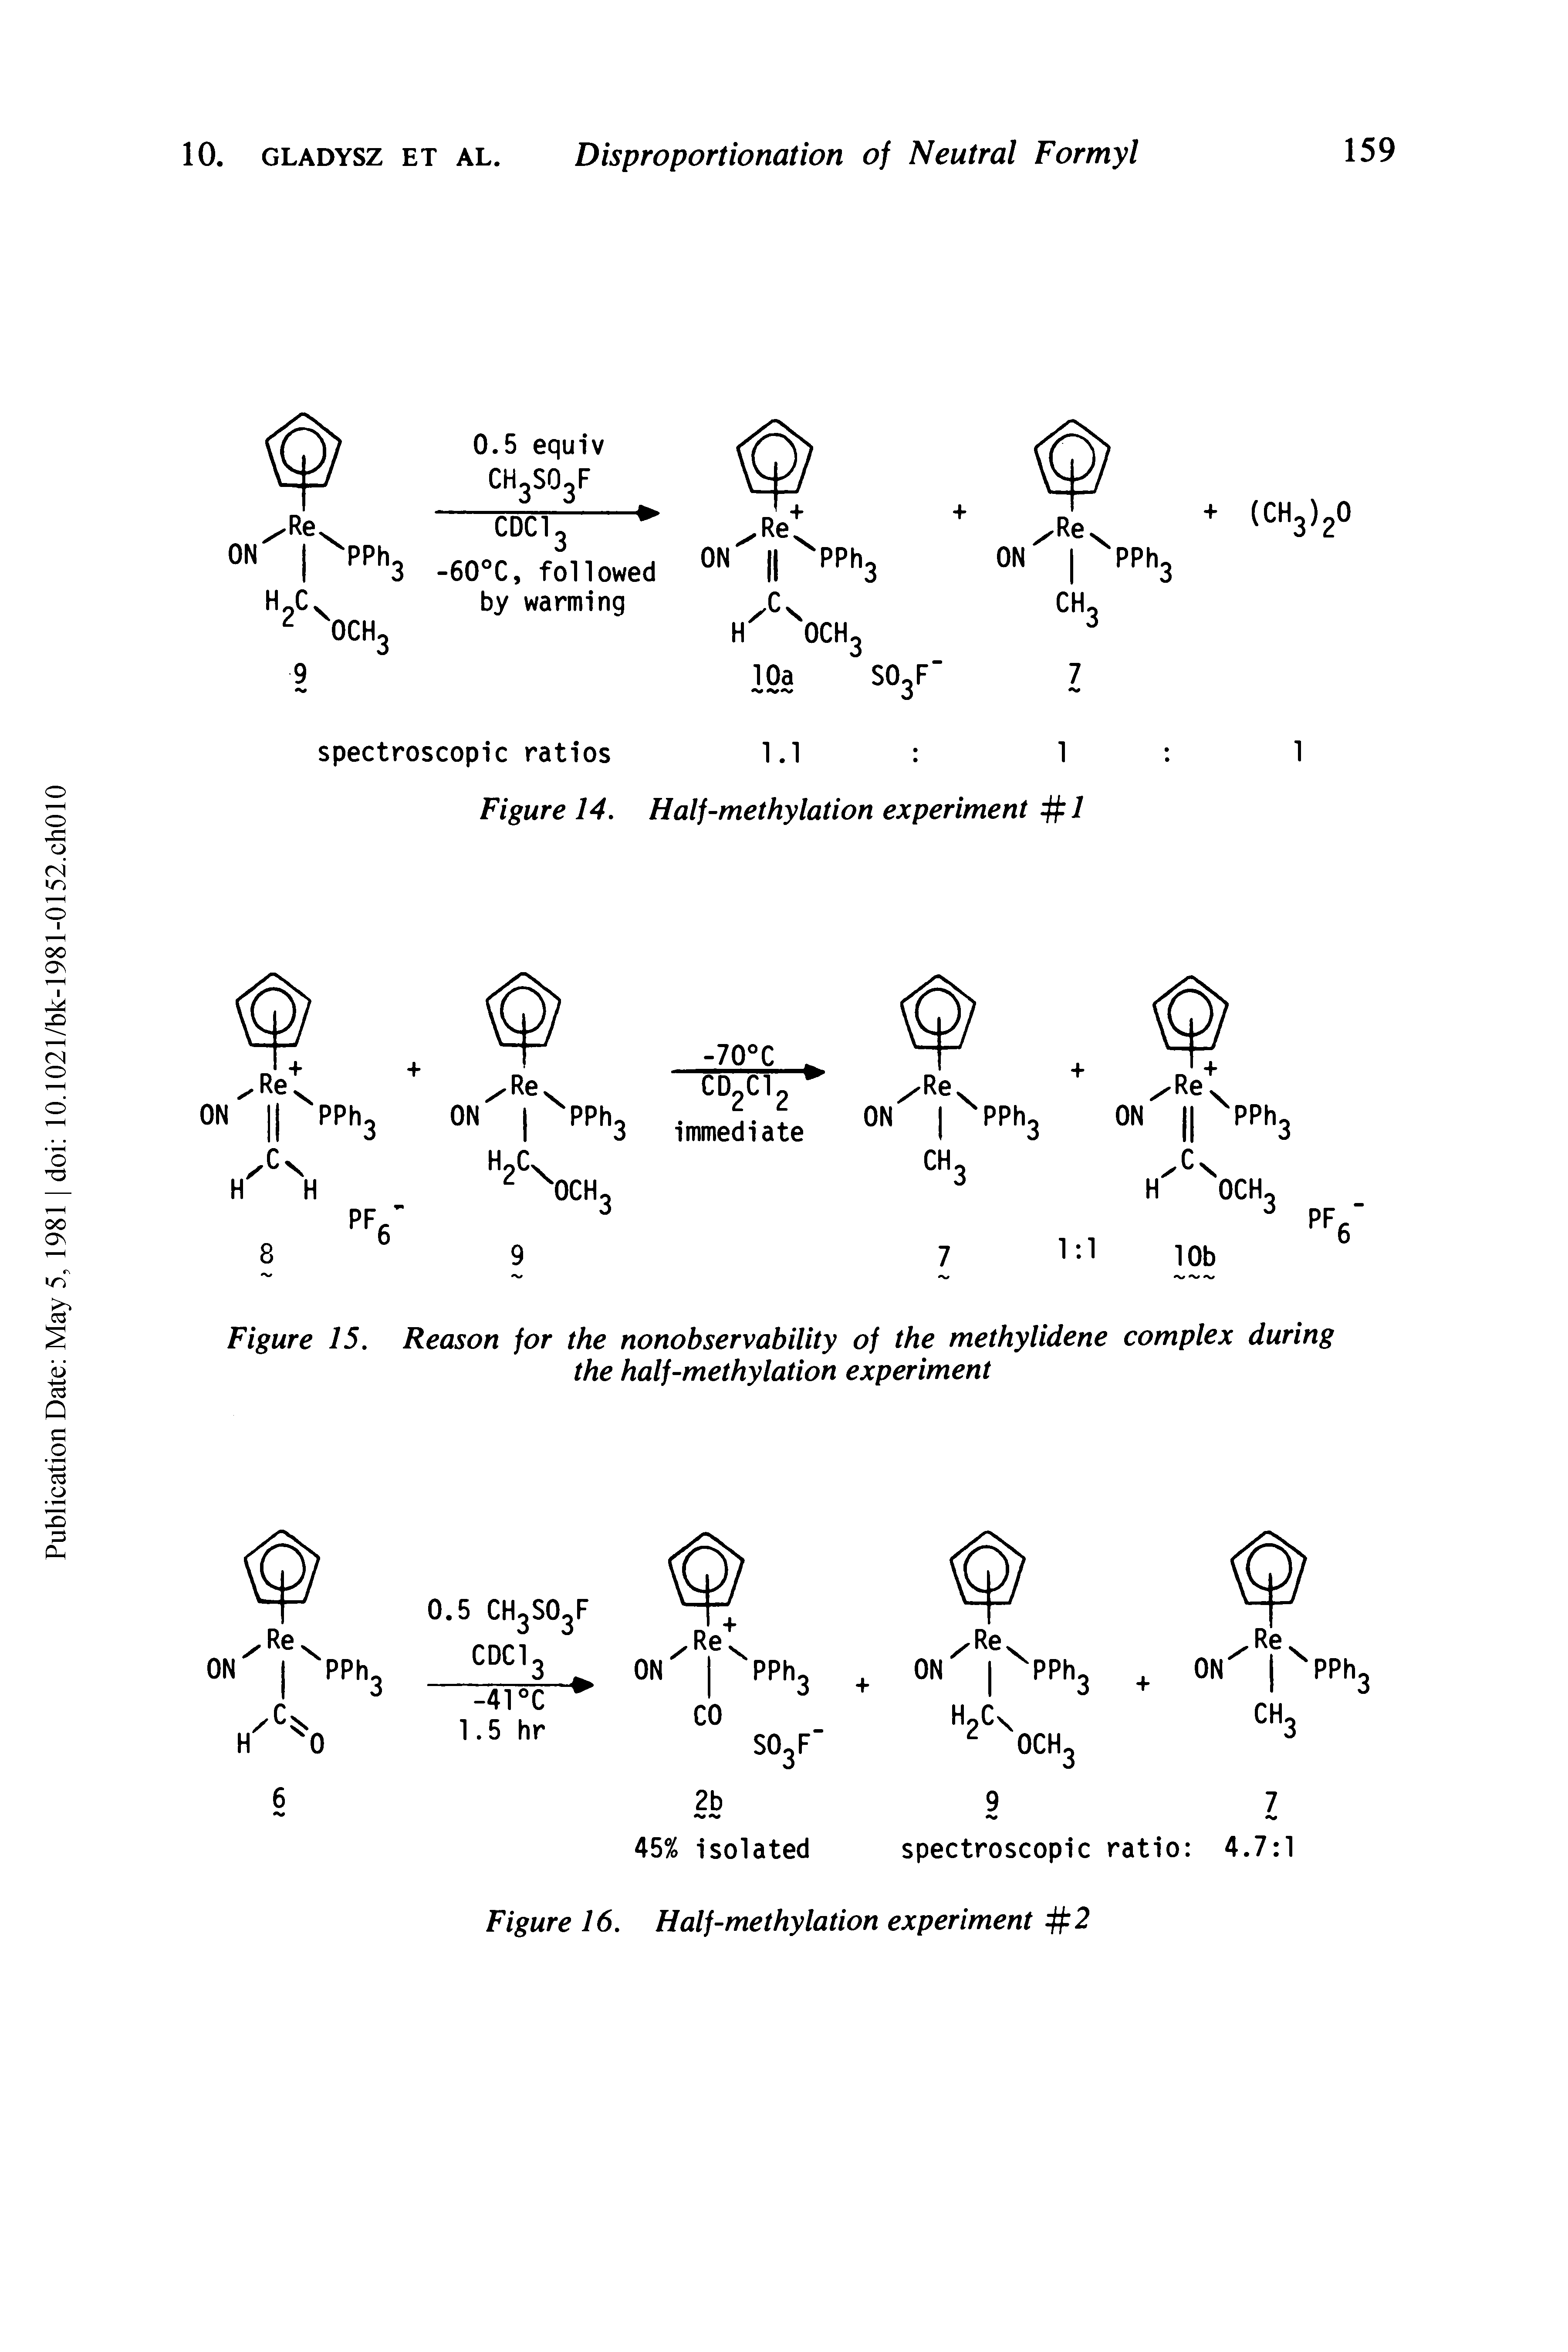 Figure 15. Reason for the nonobservability of the methylidene complex during the half-methylation experiment...